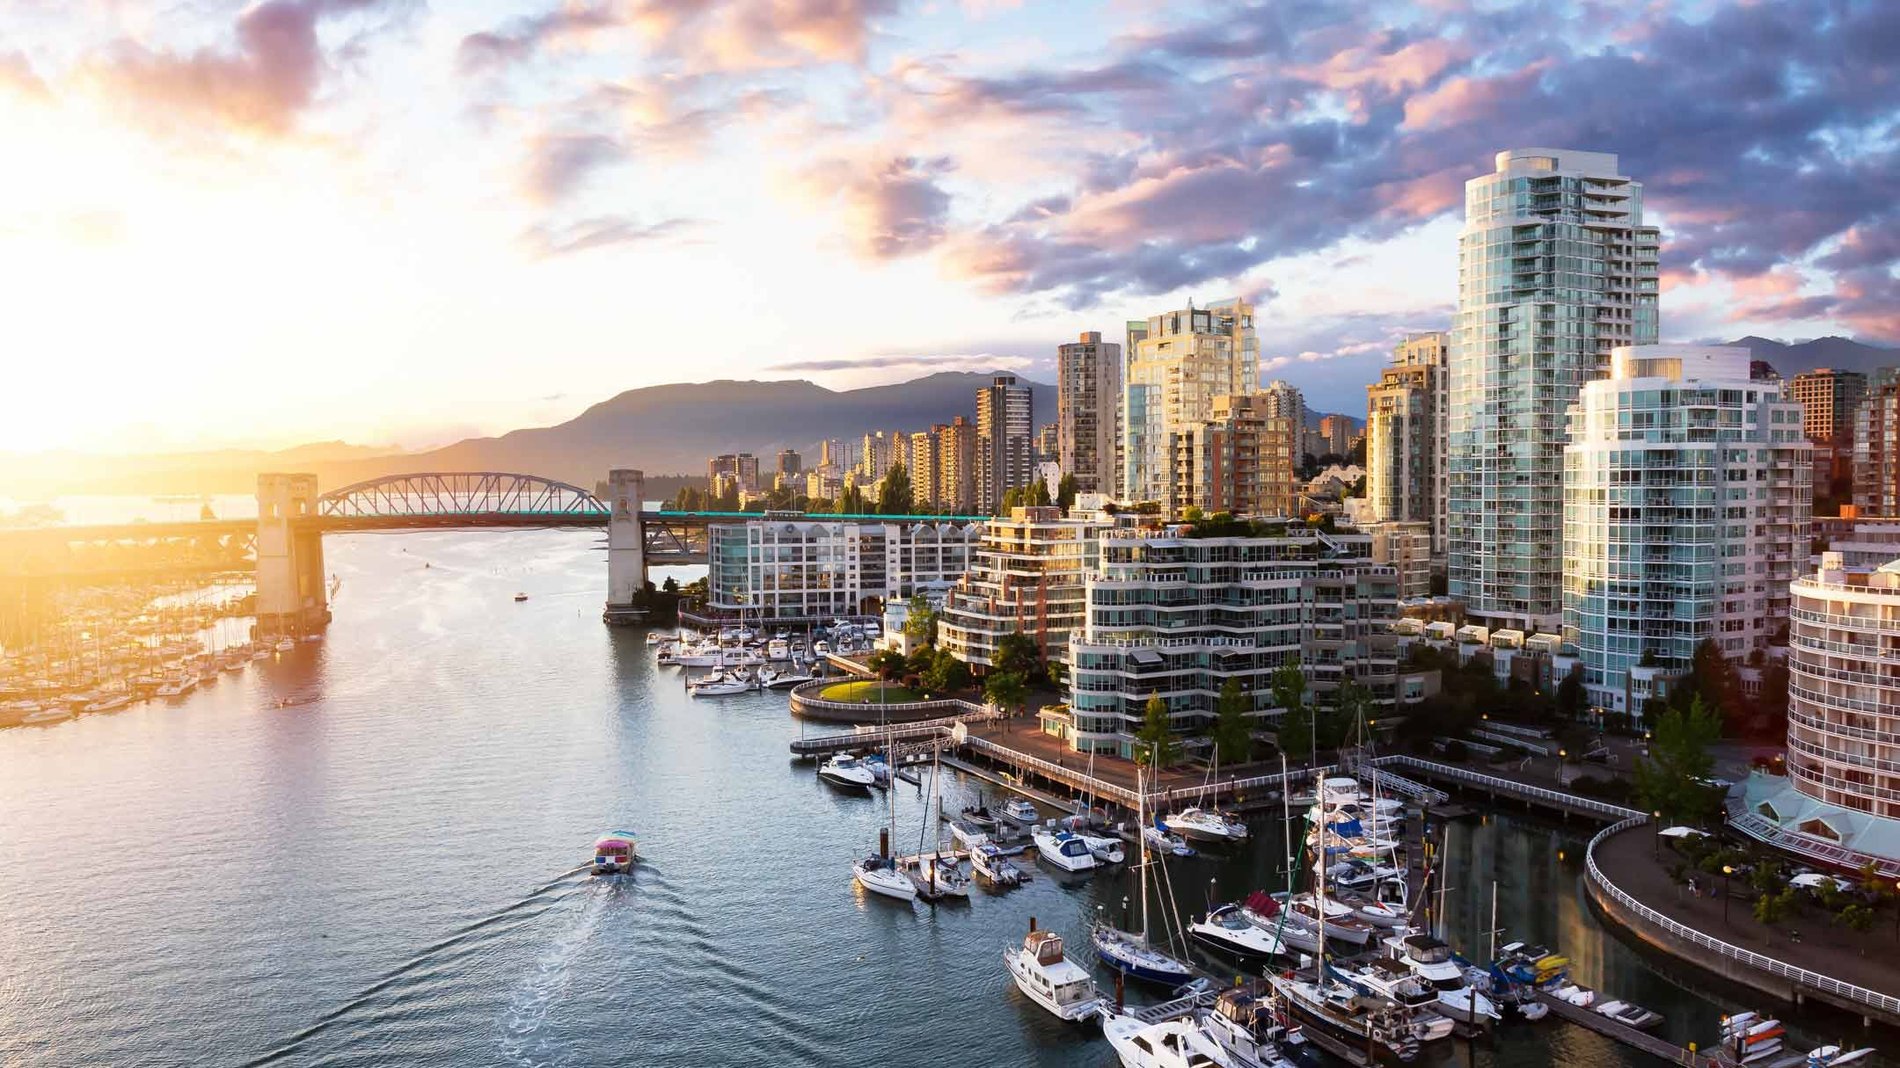 An aerial view of False Creek, Downtown Vancouver, British Columbia